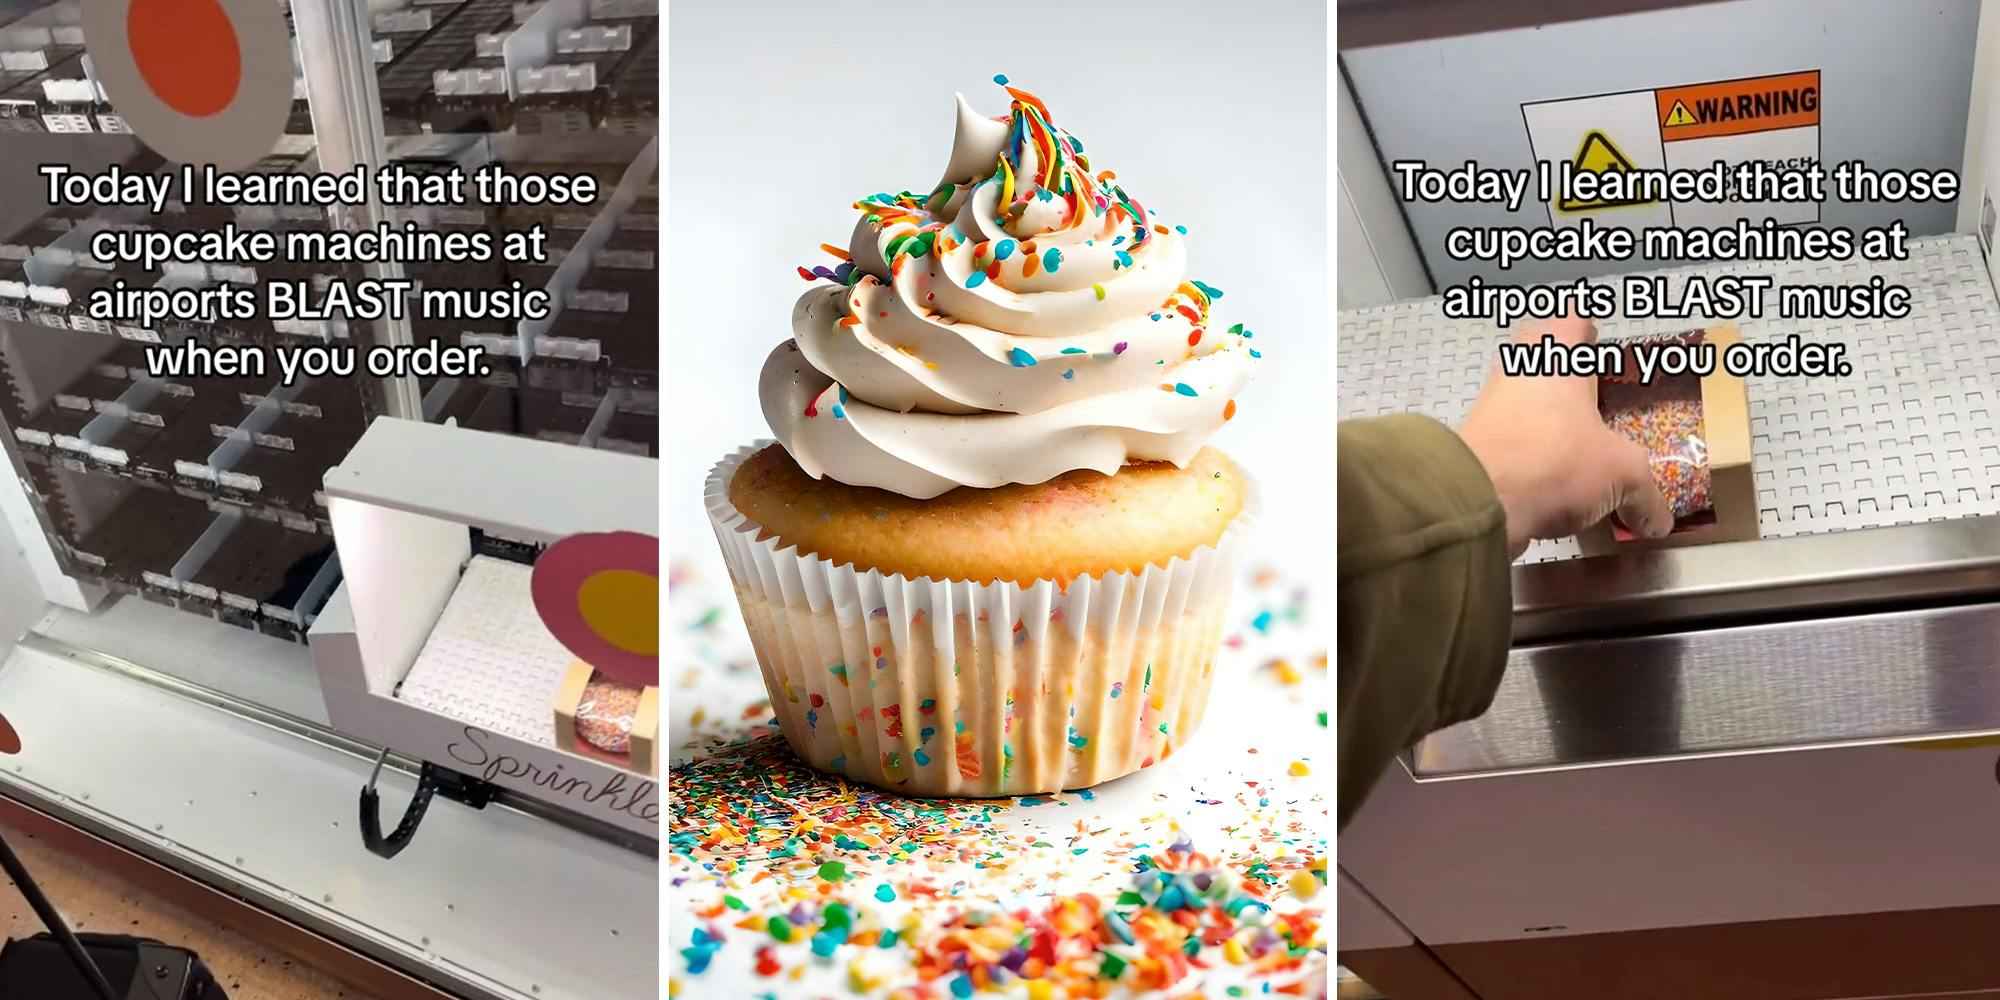 Man tries to order from cupcake vending machine. He wasn’t prepared for what happened next